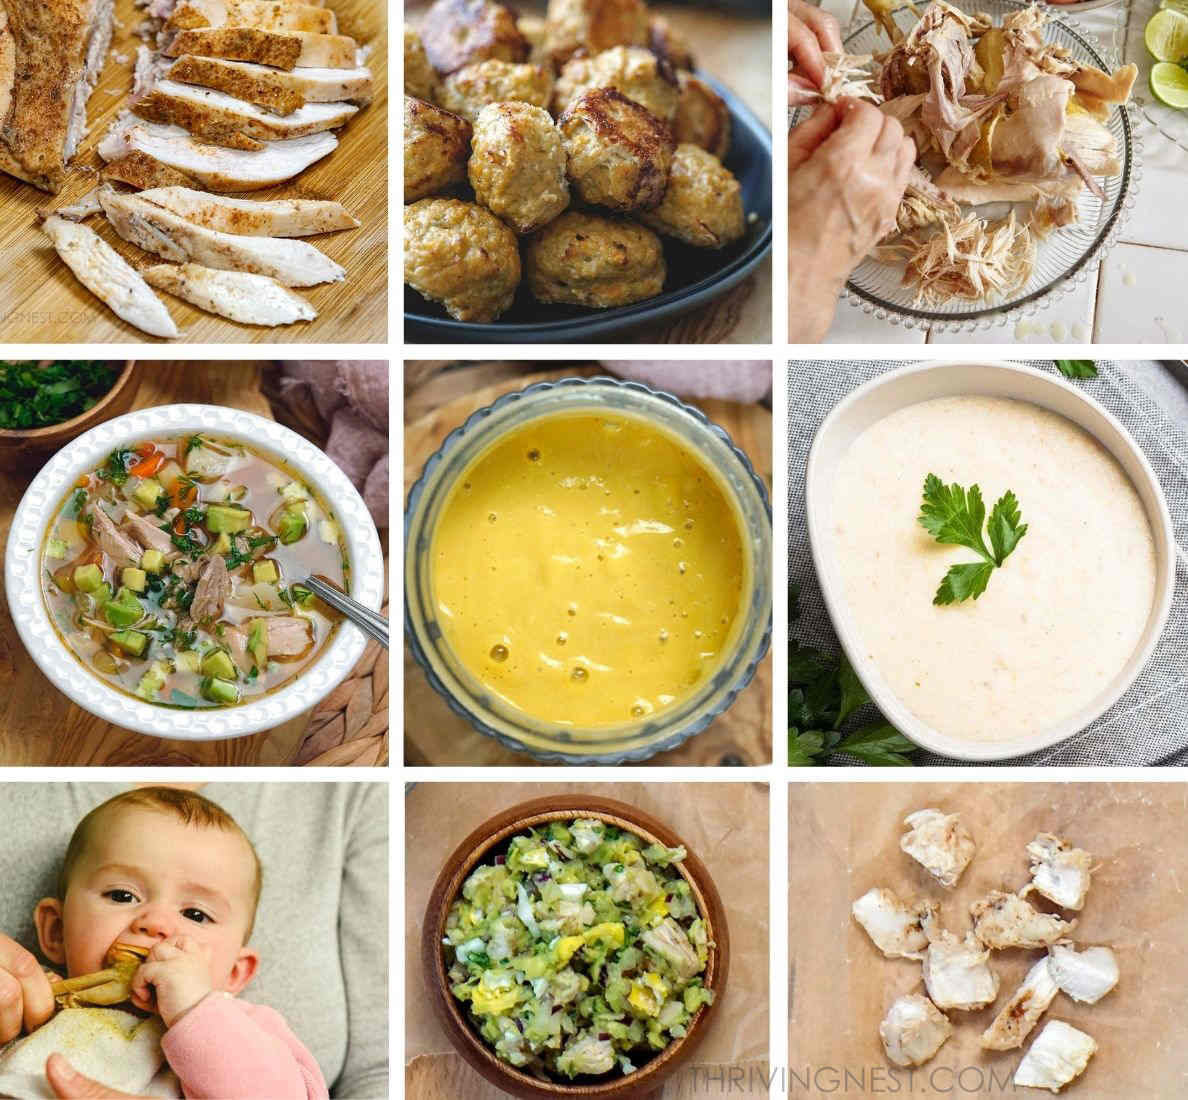 How to prepare cook cut and serve chicken for babies starting from purees and smooth soups to finger foods made with cooked chicken and ground chicken. Baby chicken recipes for babies 6 months and up suitable for baby led weaning as well. #babychickenrecipes #chickenforbaby #chickenbabyfood #babyledweaning